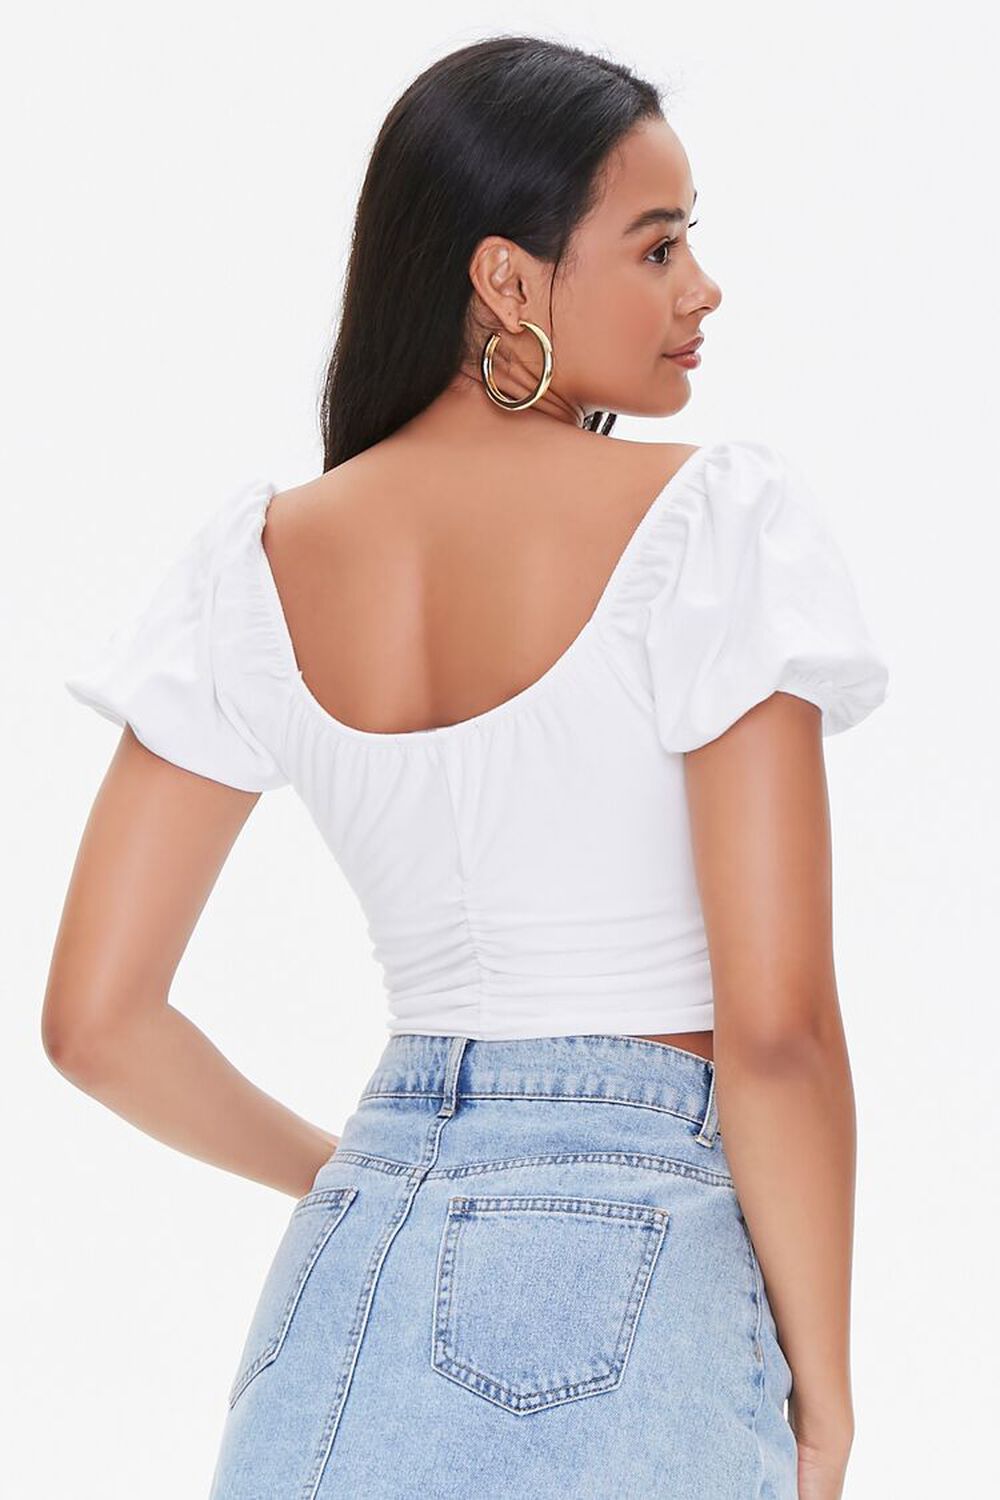 WHITE Puff-Sleeve Crop Top, image 3